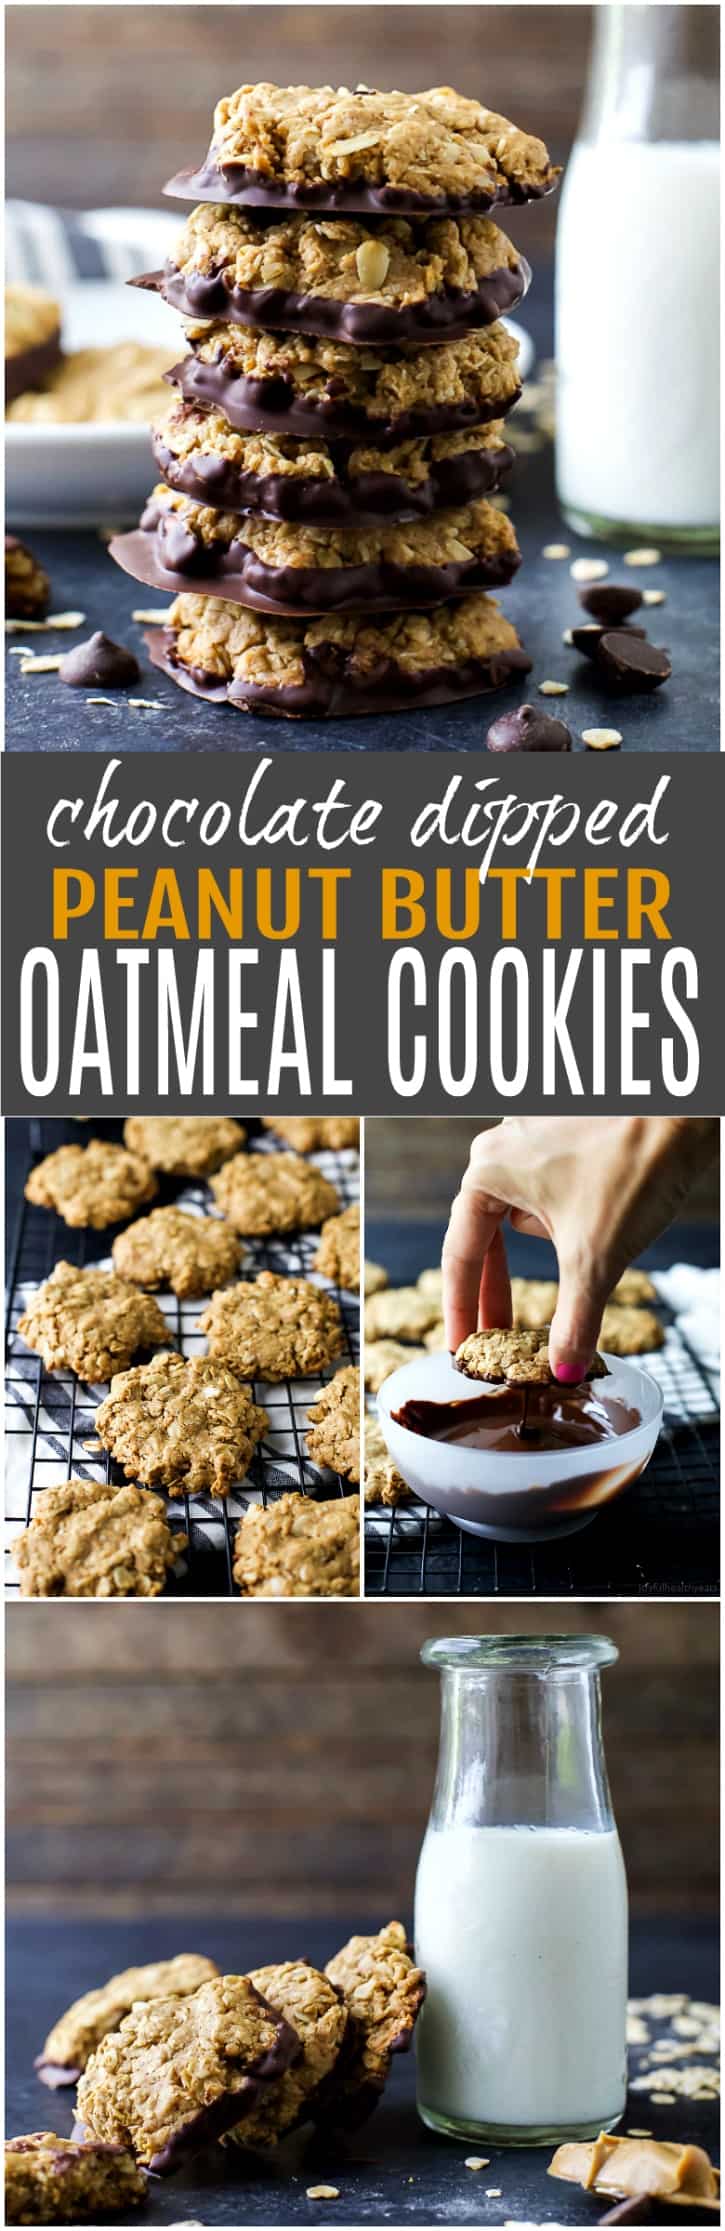 Pinterest collage for Chocolate Dipped Oatmeal Peanut Butter Cookies recipe